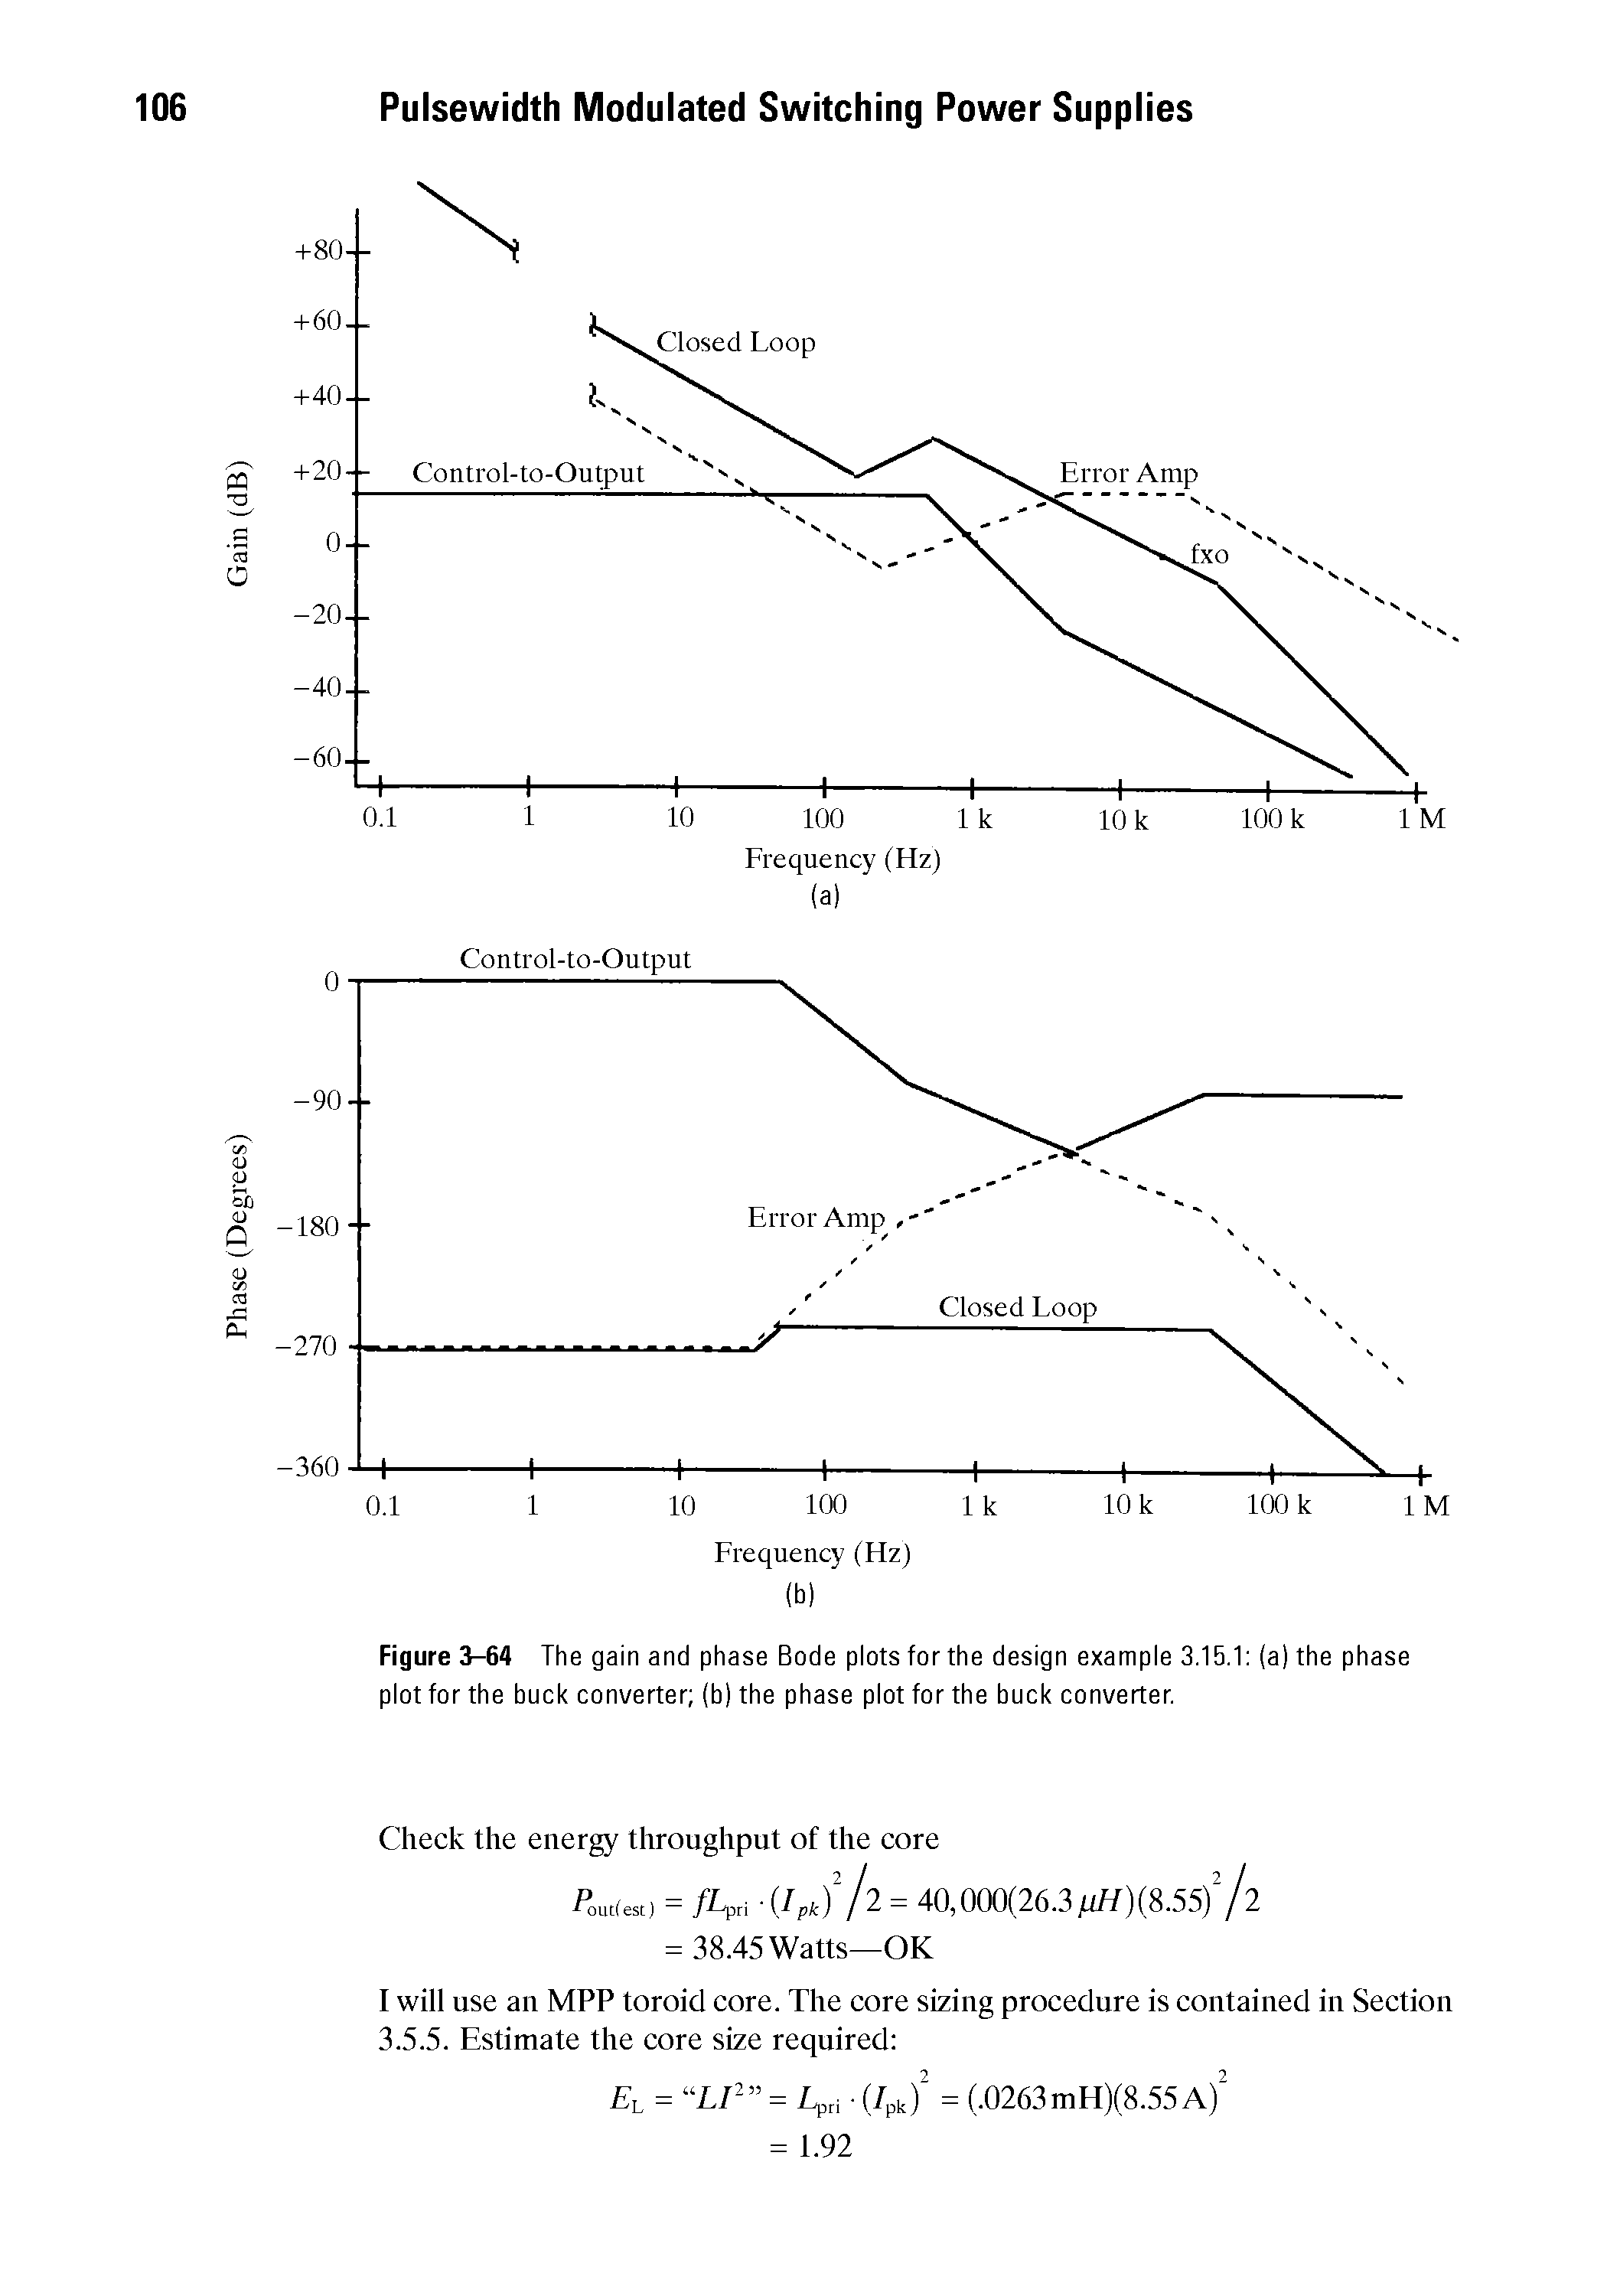 Figure 3-64 The gain and phase Bode plots for the design example 3.15.1 (a) the phase plot for the buck converter (b) the phase plot for the buck converter.